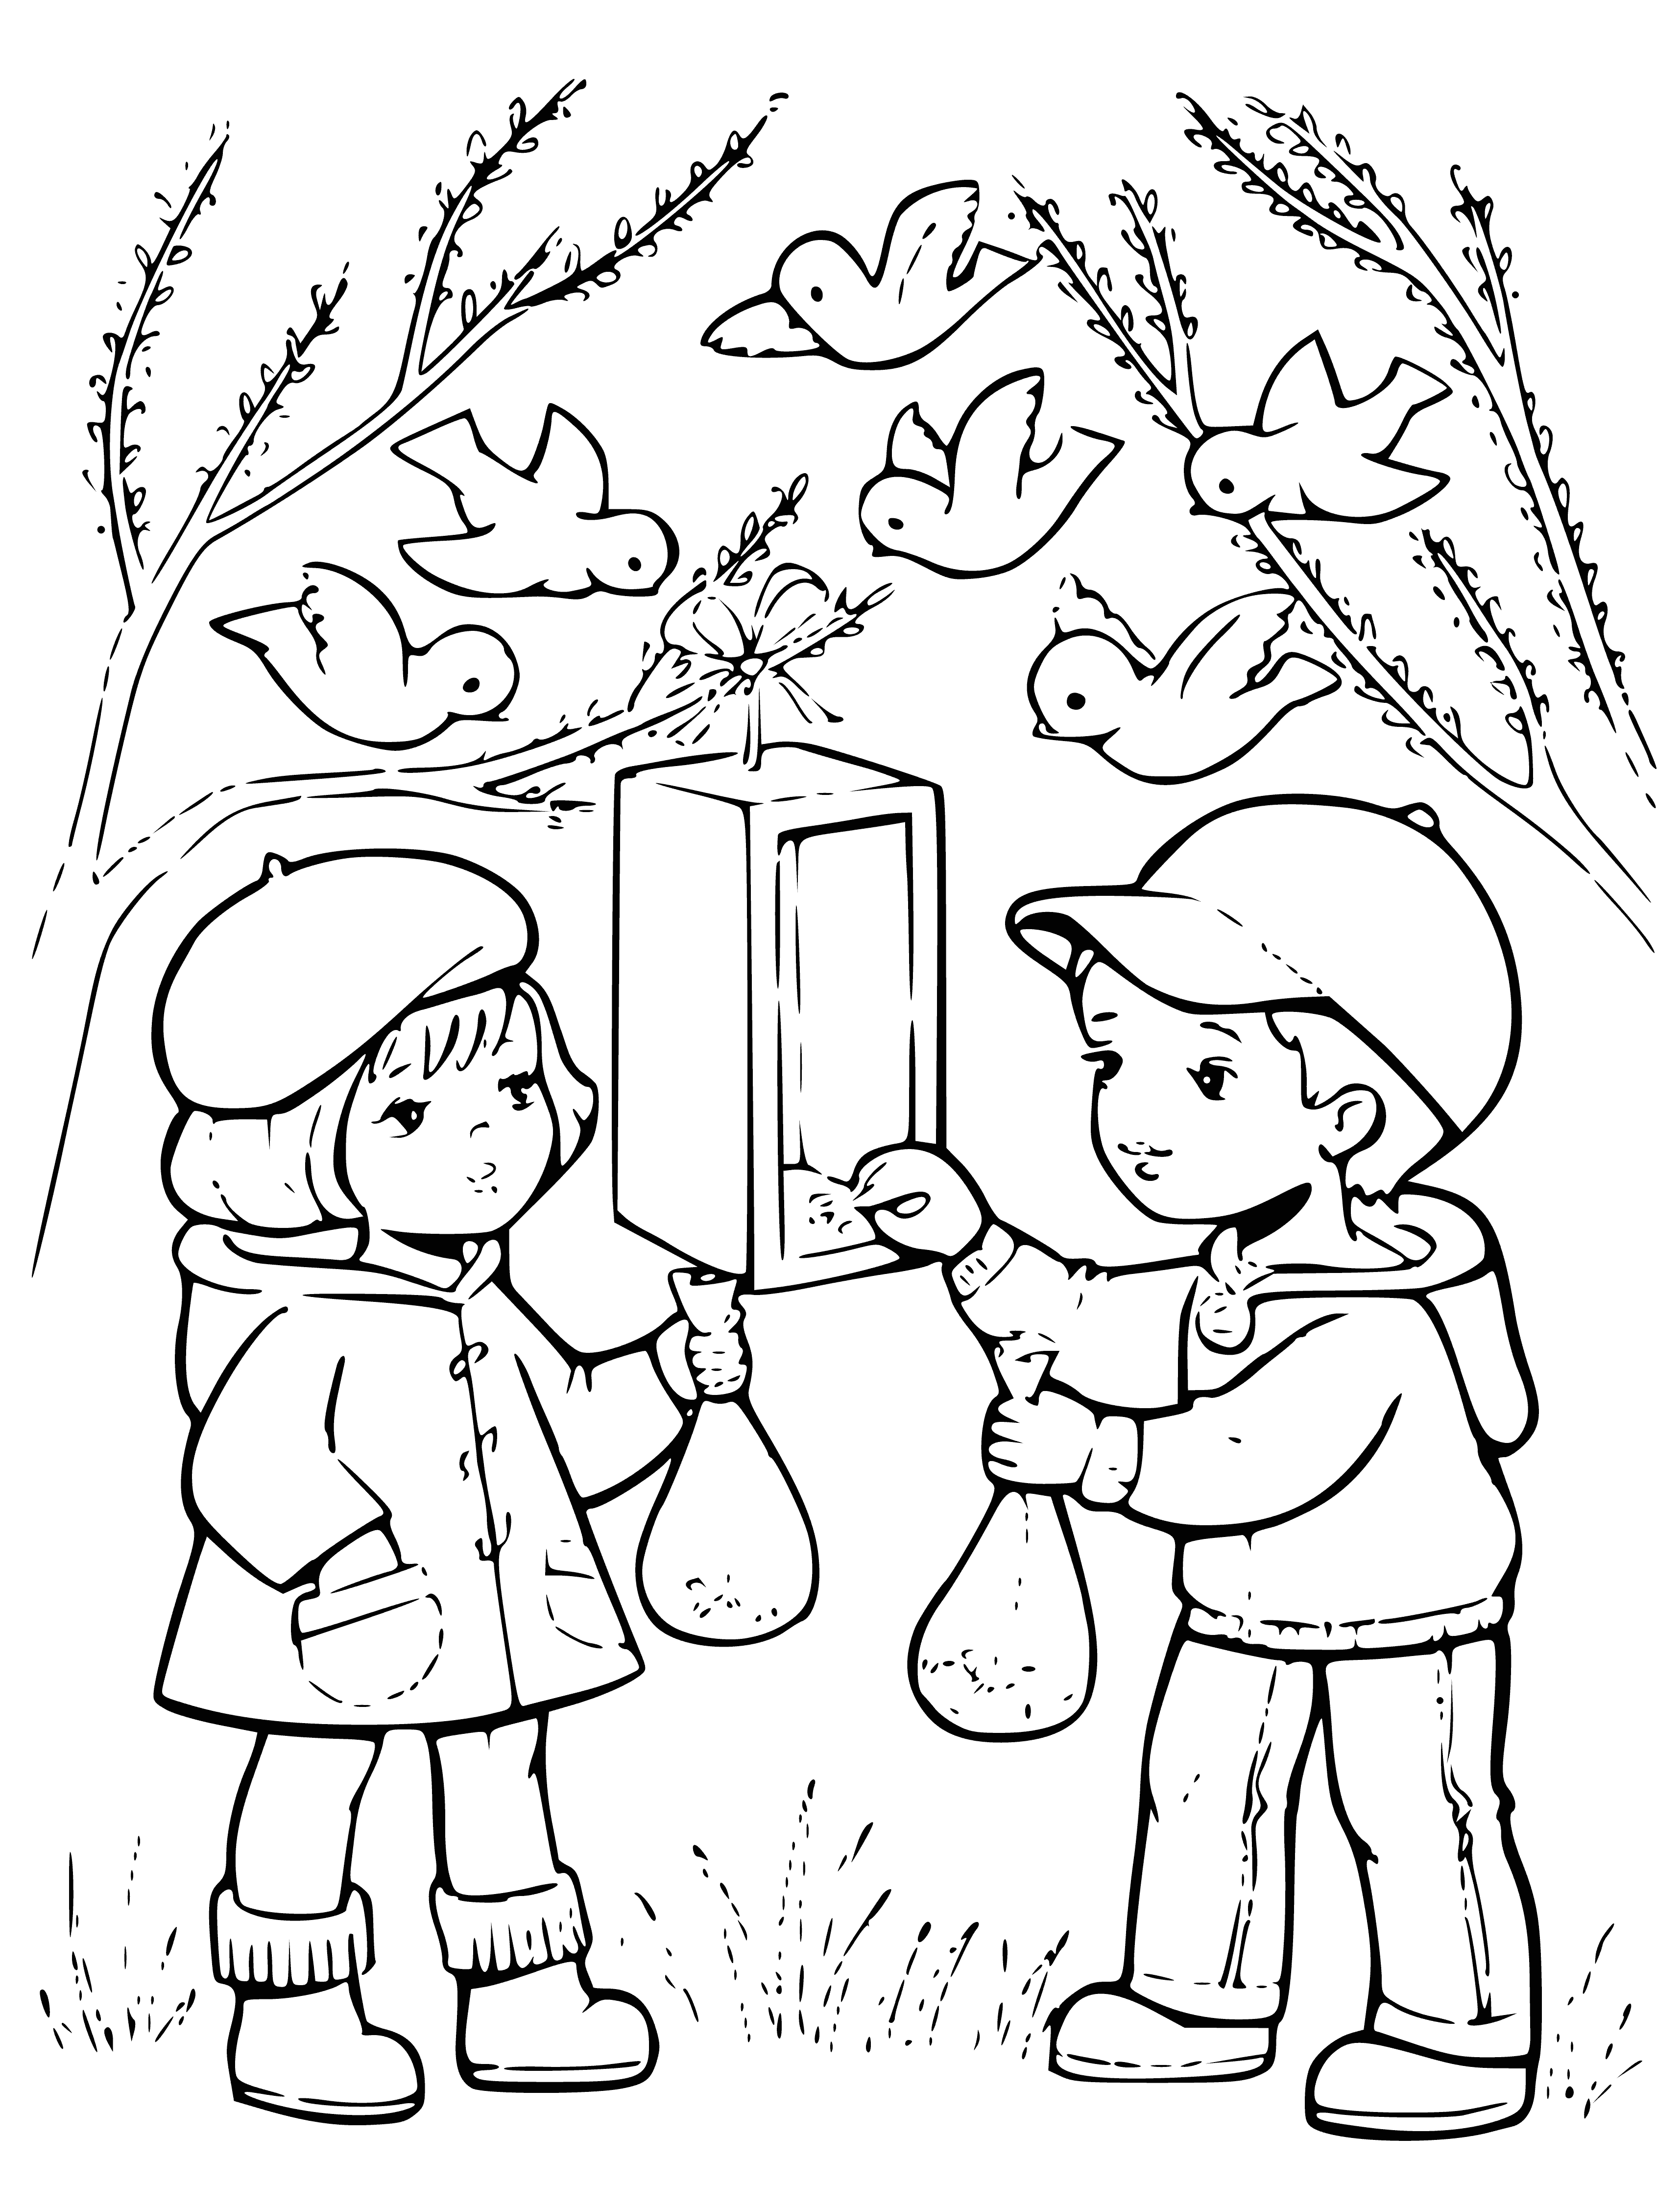 coloring page: 2 children standing outside feeding birds. One holding bread bag, other pouring bird seed. Bird houses & trees in background.